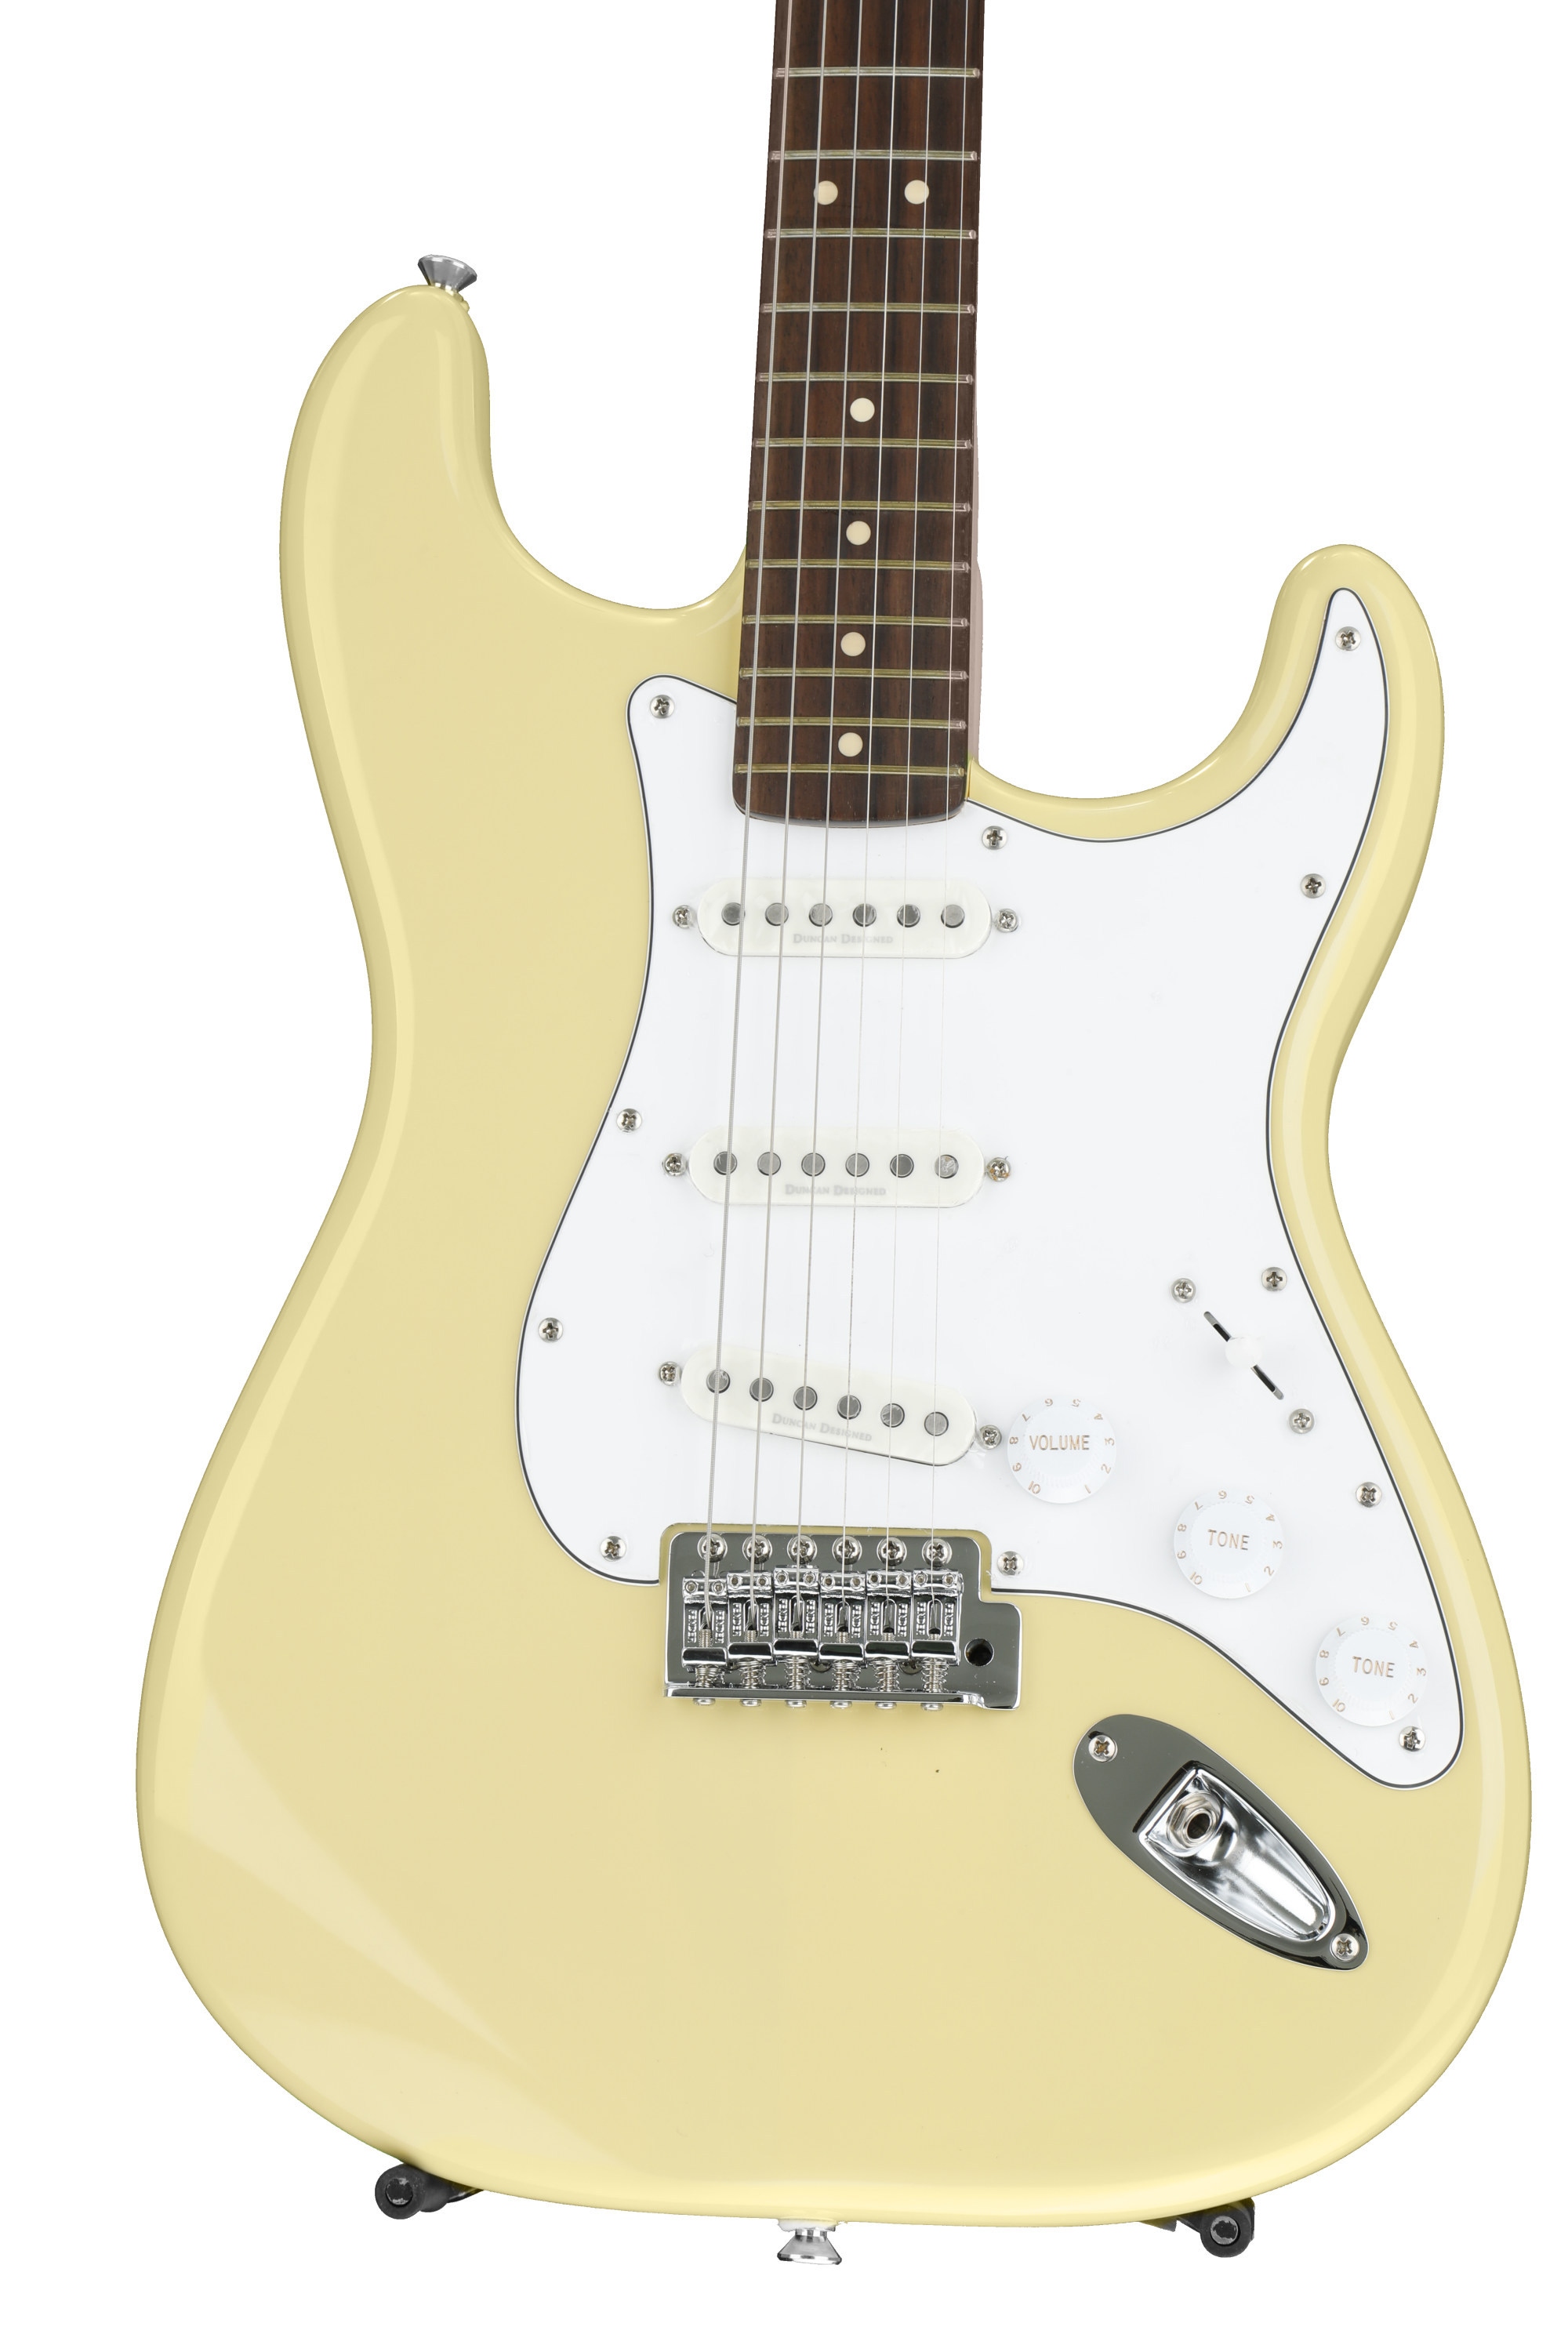 Squier Vintage Modified Stratocaster VBLガリやノイズなどはありません